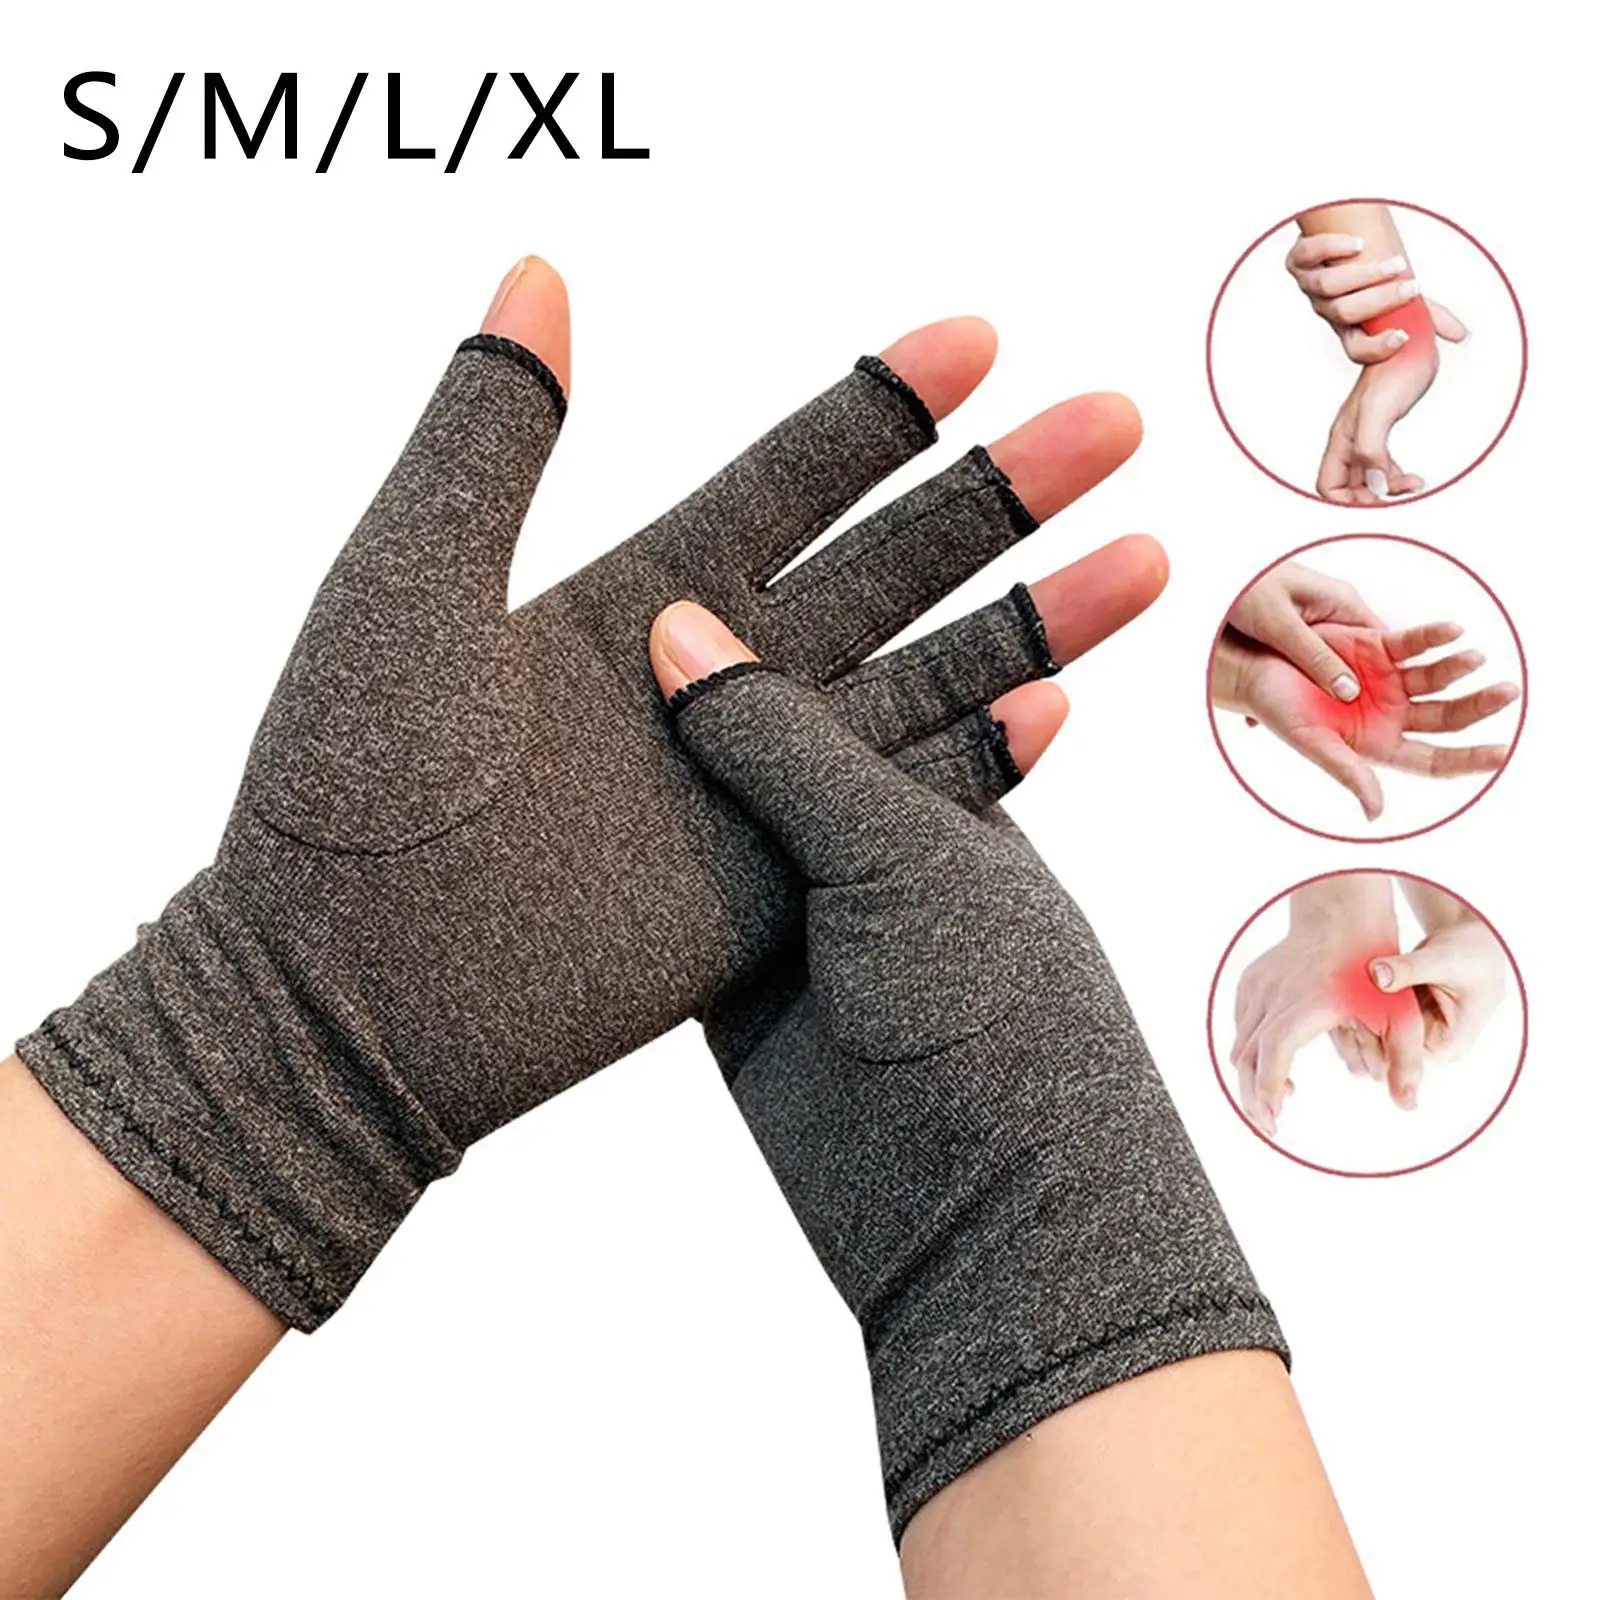 Fingerless Arthritis Compression Gloves  Wrist Brace Breathable Adjustable Arthritis Gloves for Cycling Training Fitness